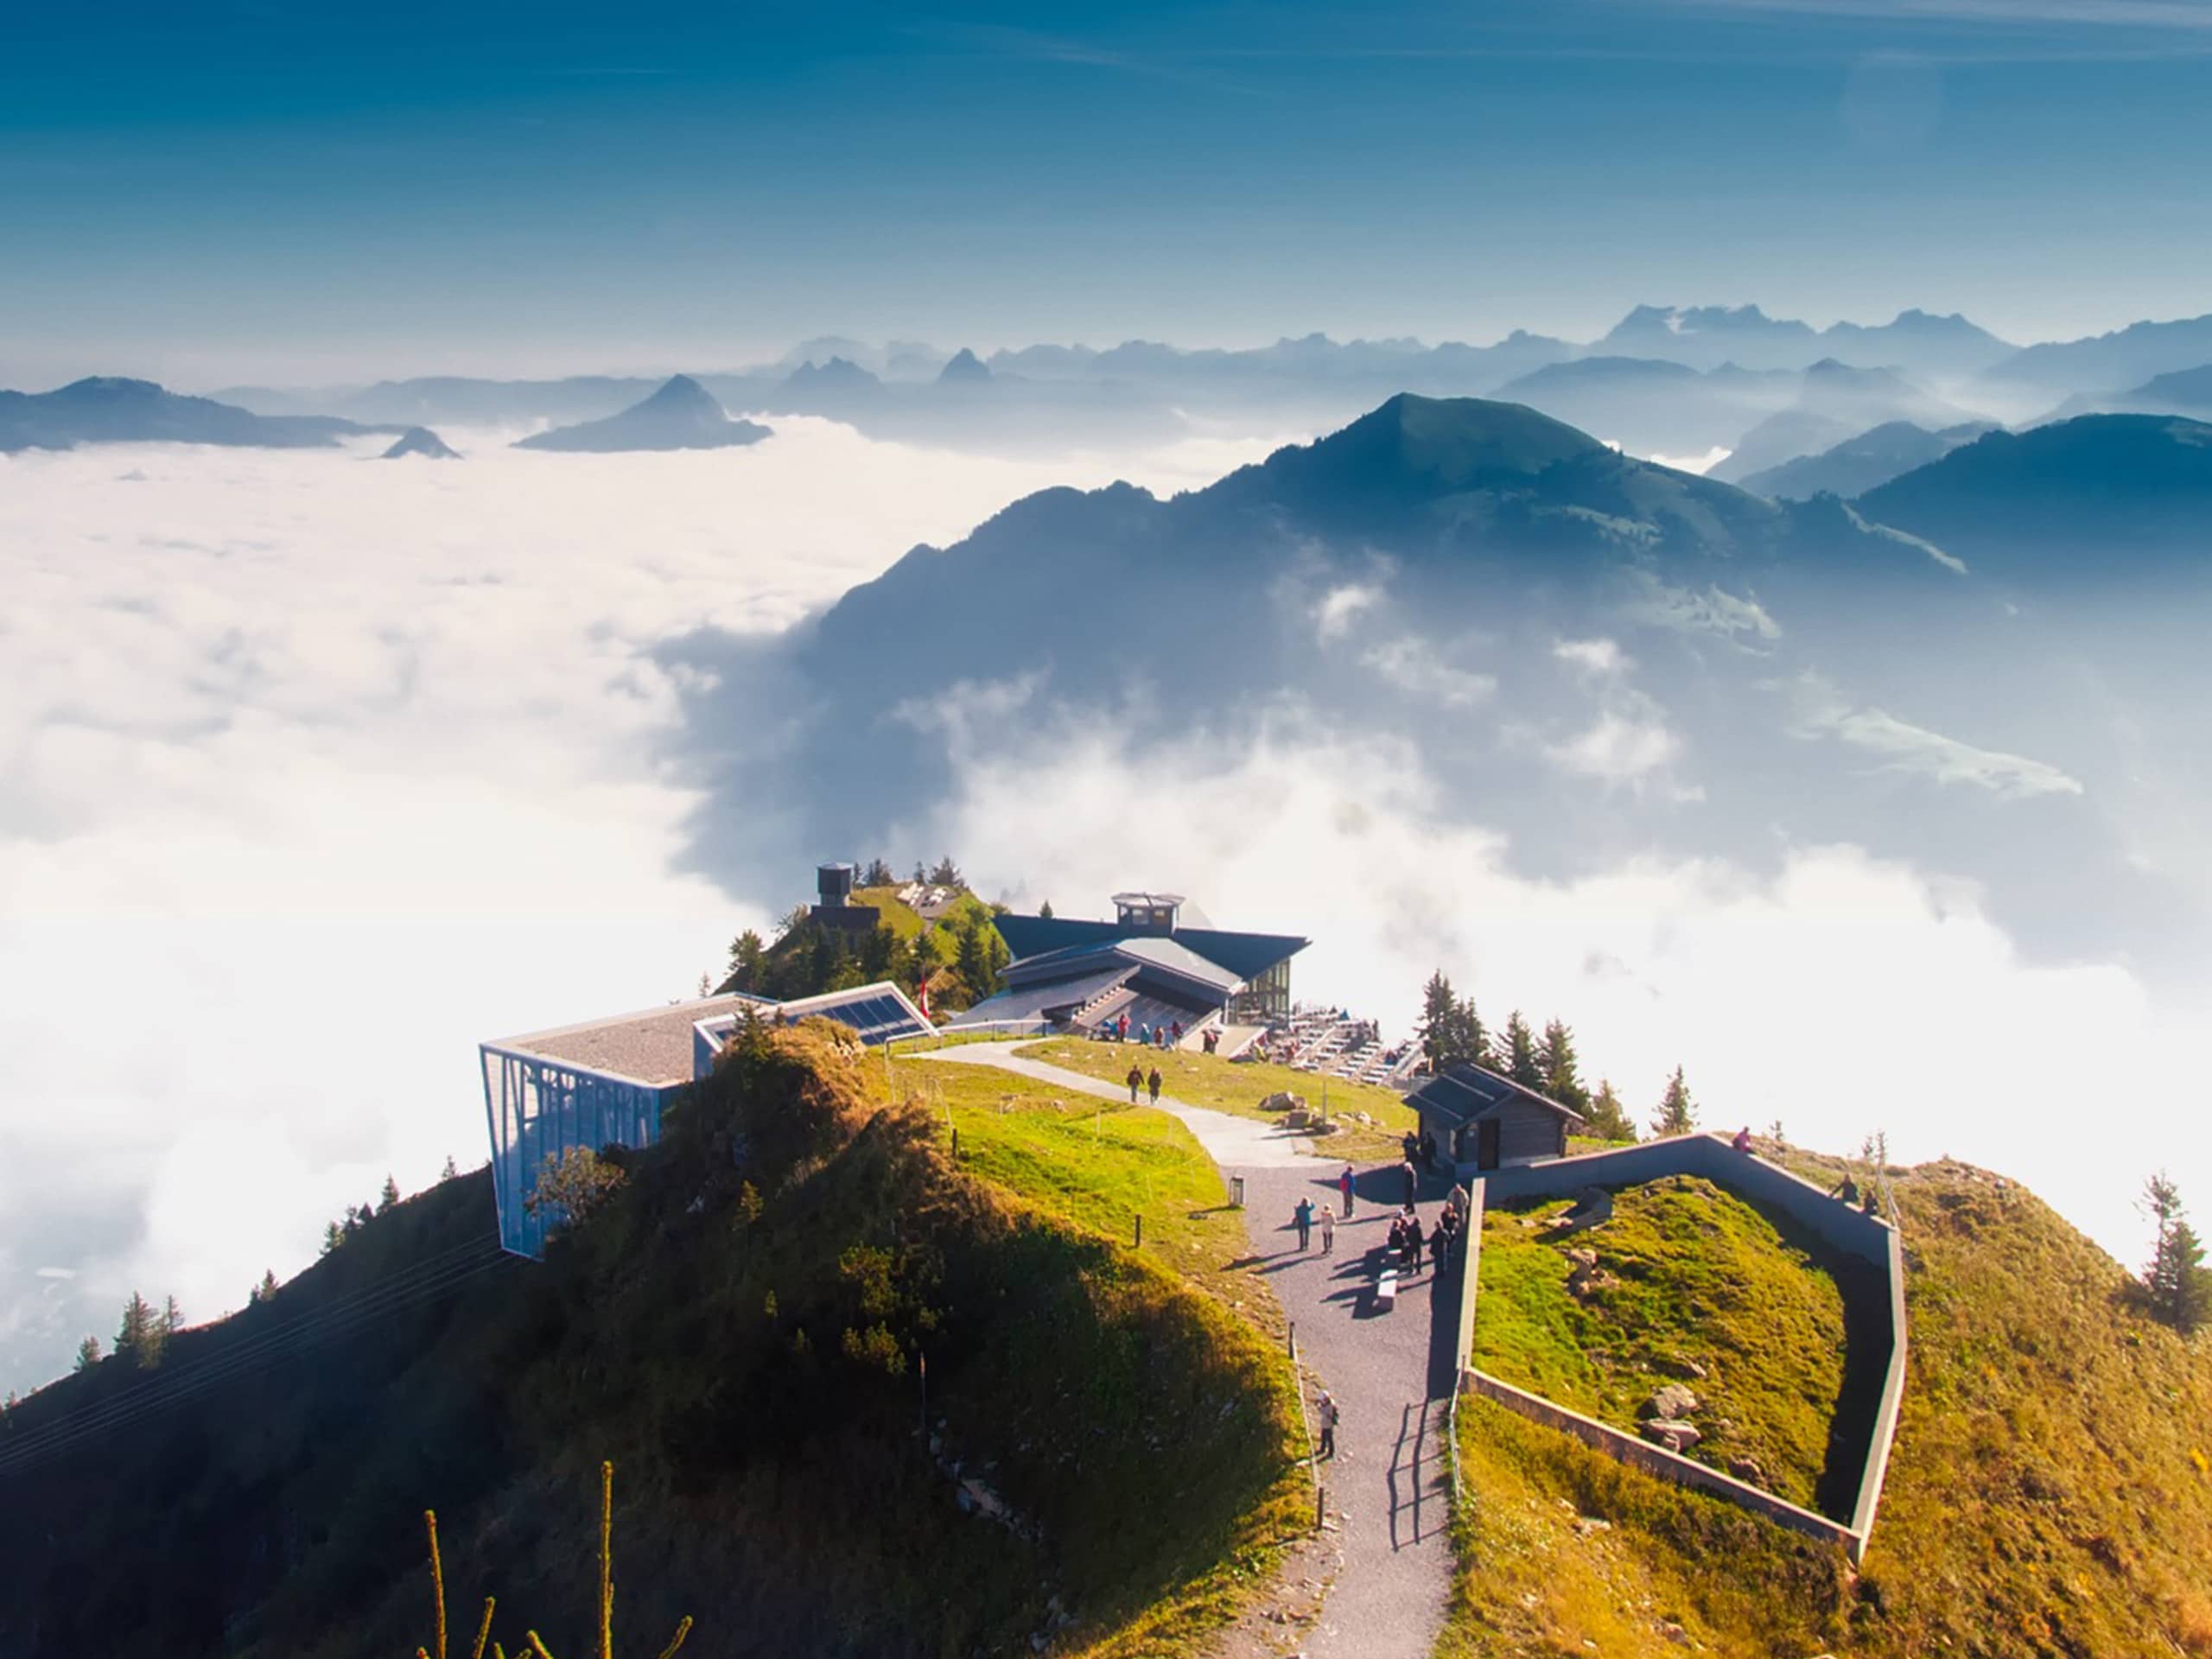 Switzerland is tailor-made for outdoorsy adventure